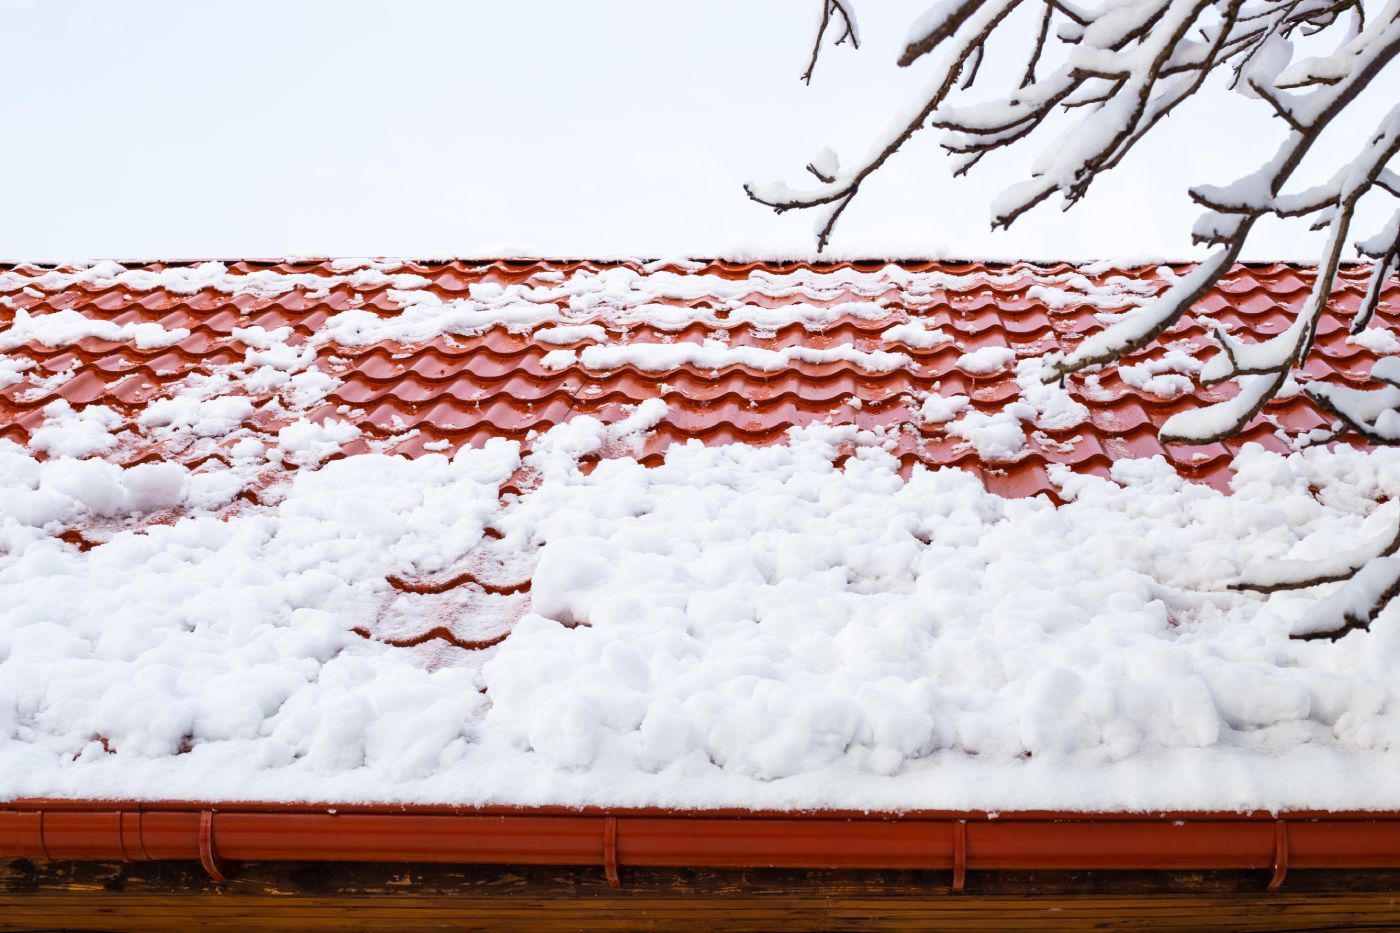 Winterizing Your Roof